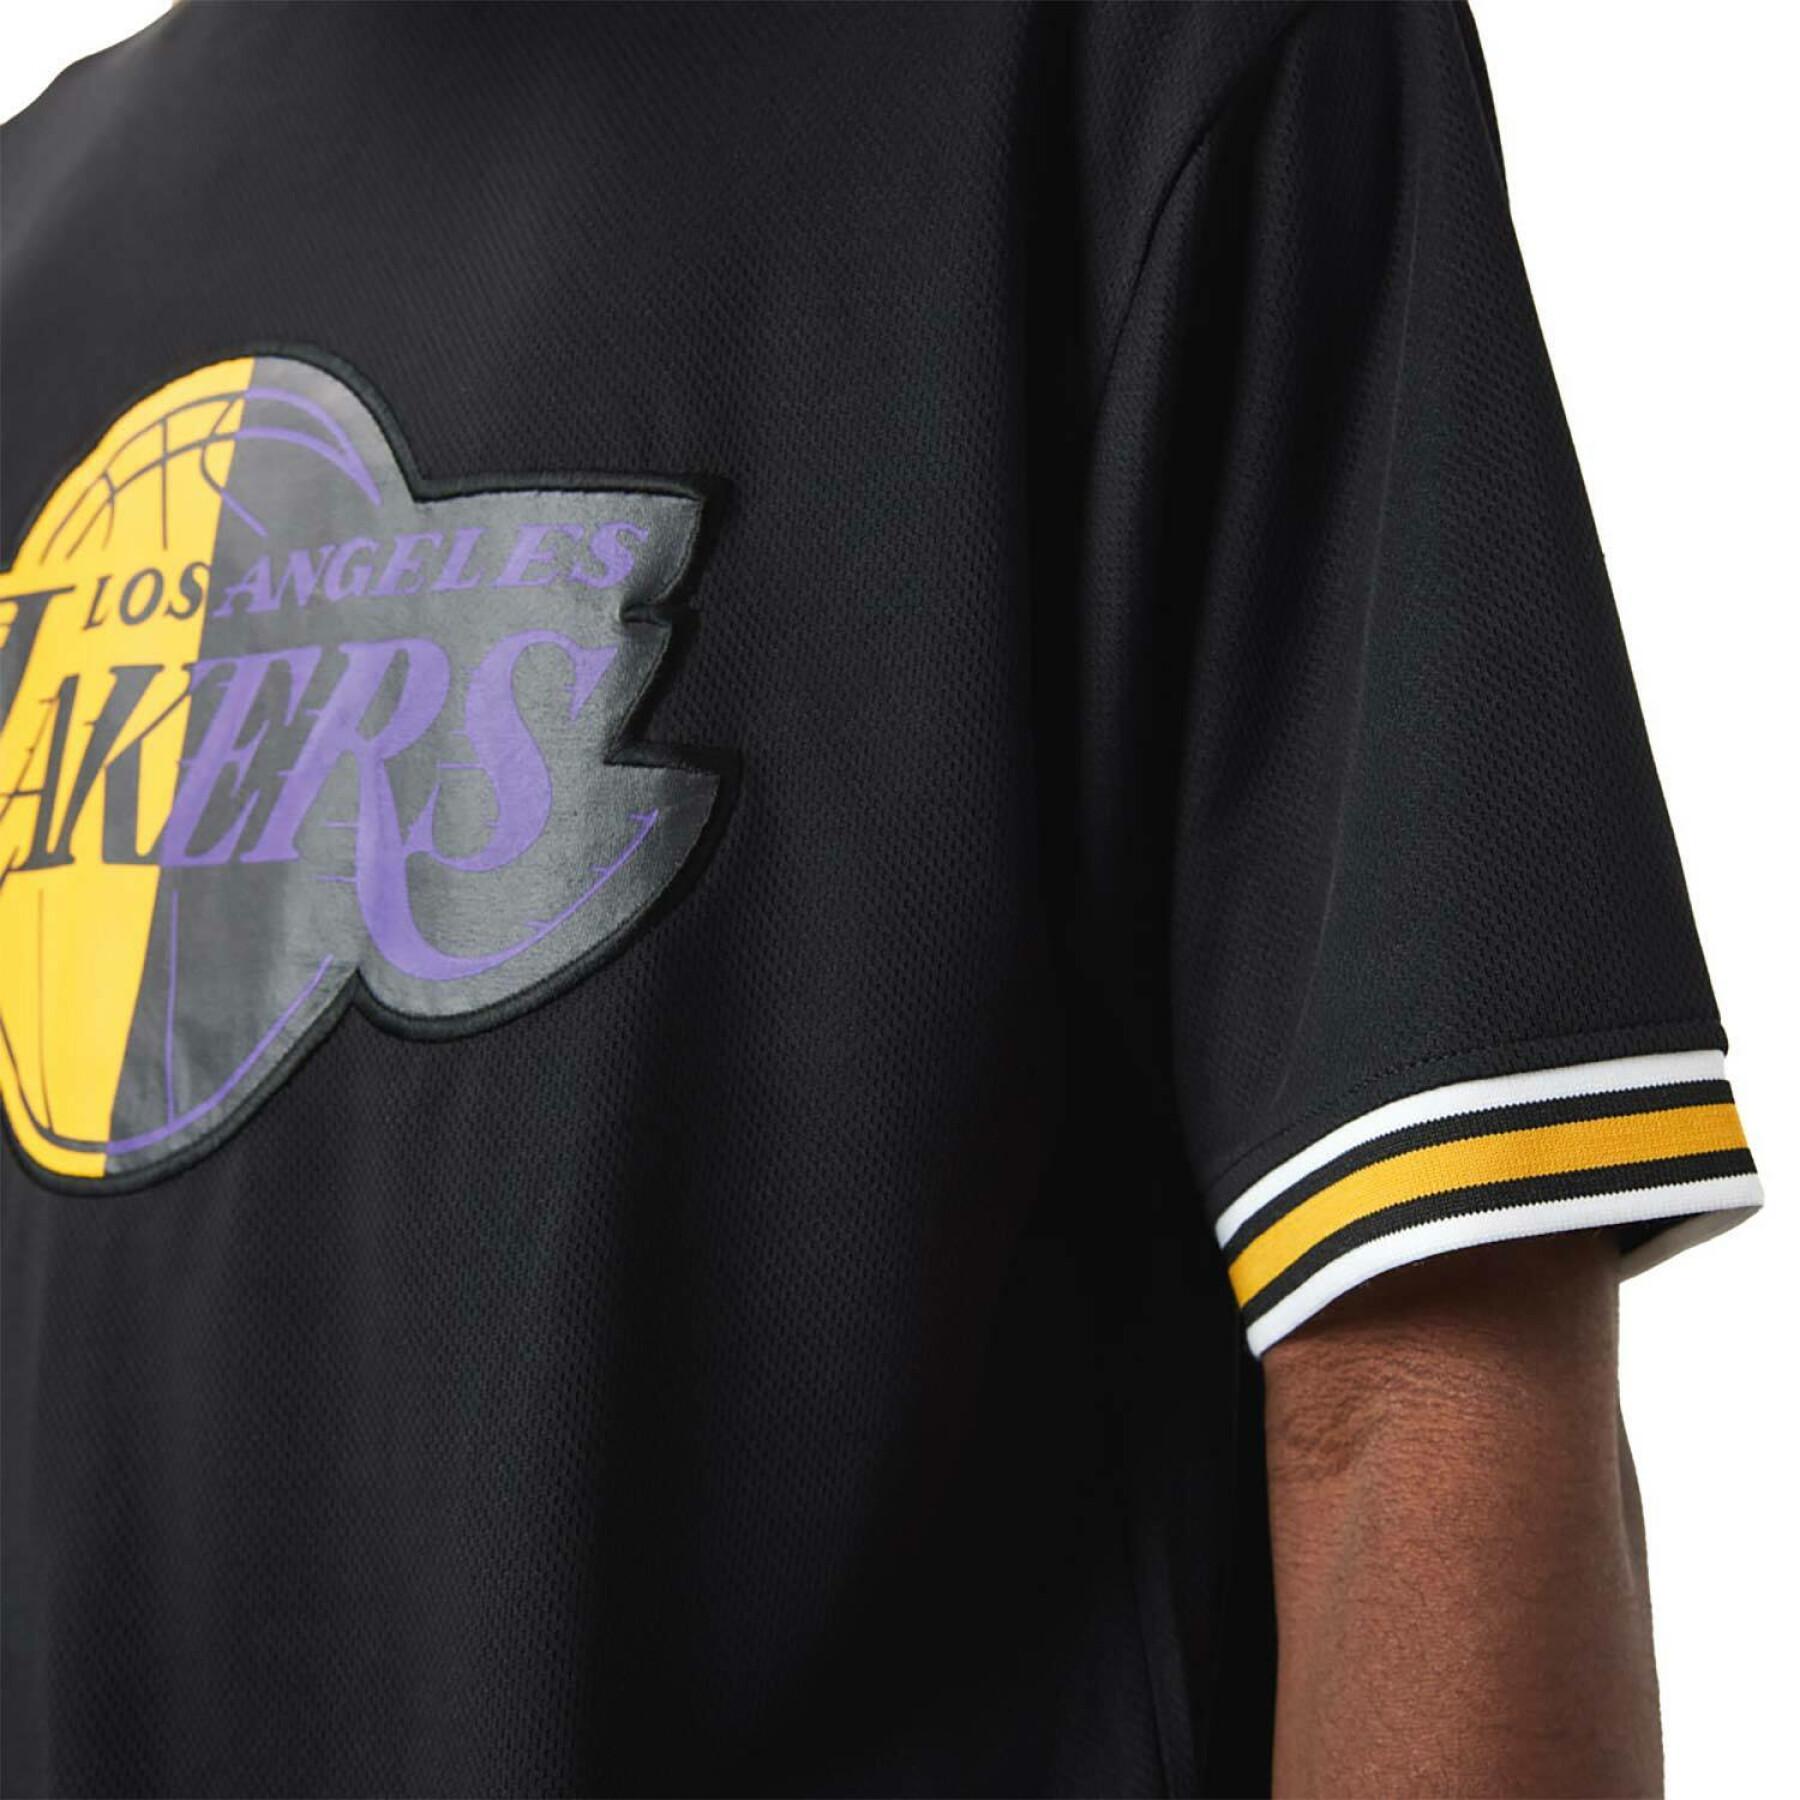 T-shirt oversize con logo Los Angeles Lakers